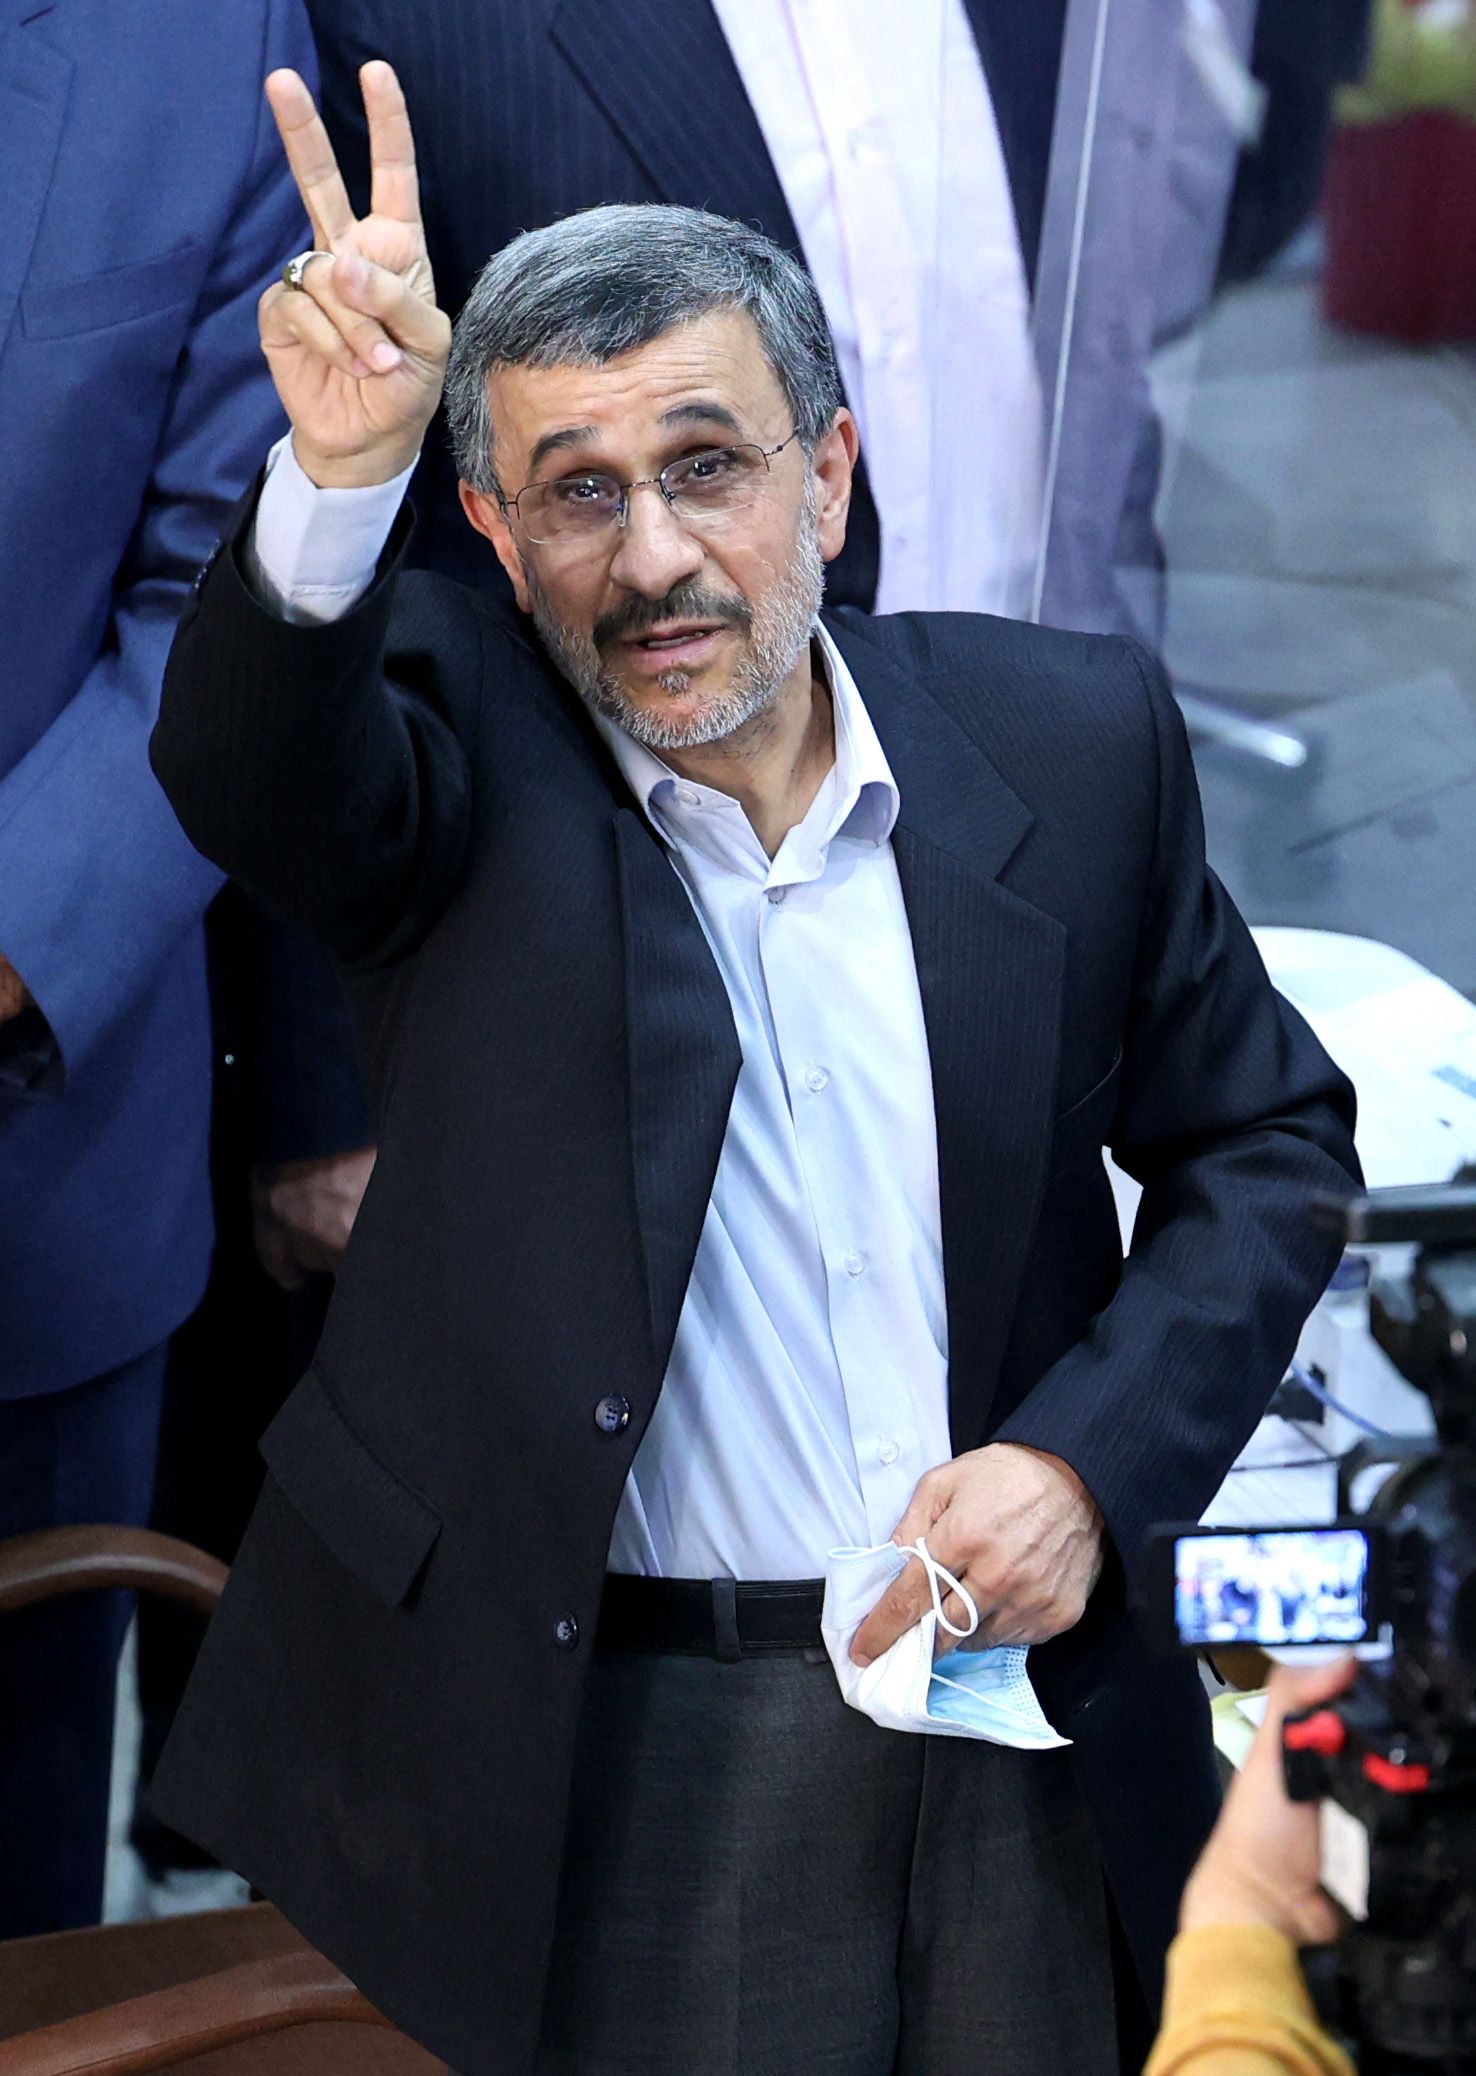 Iranian presidential candidate and former president Mahmoud Ahmadinejad flashes the victory sign as he registers his candidacy for the post of president of Iran, at the Interior Ministry in Tehran on May 12, 2021. - Iranian hopefuls threw their hats into the ring on May 11, launching the battle to succeed moderate President Hassan Rouhani in June 18 elections. (Photo by ATTA KENARE / AFP) - AFP